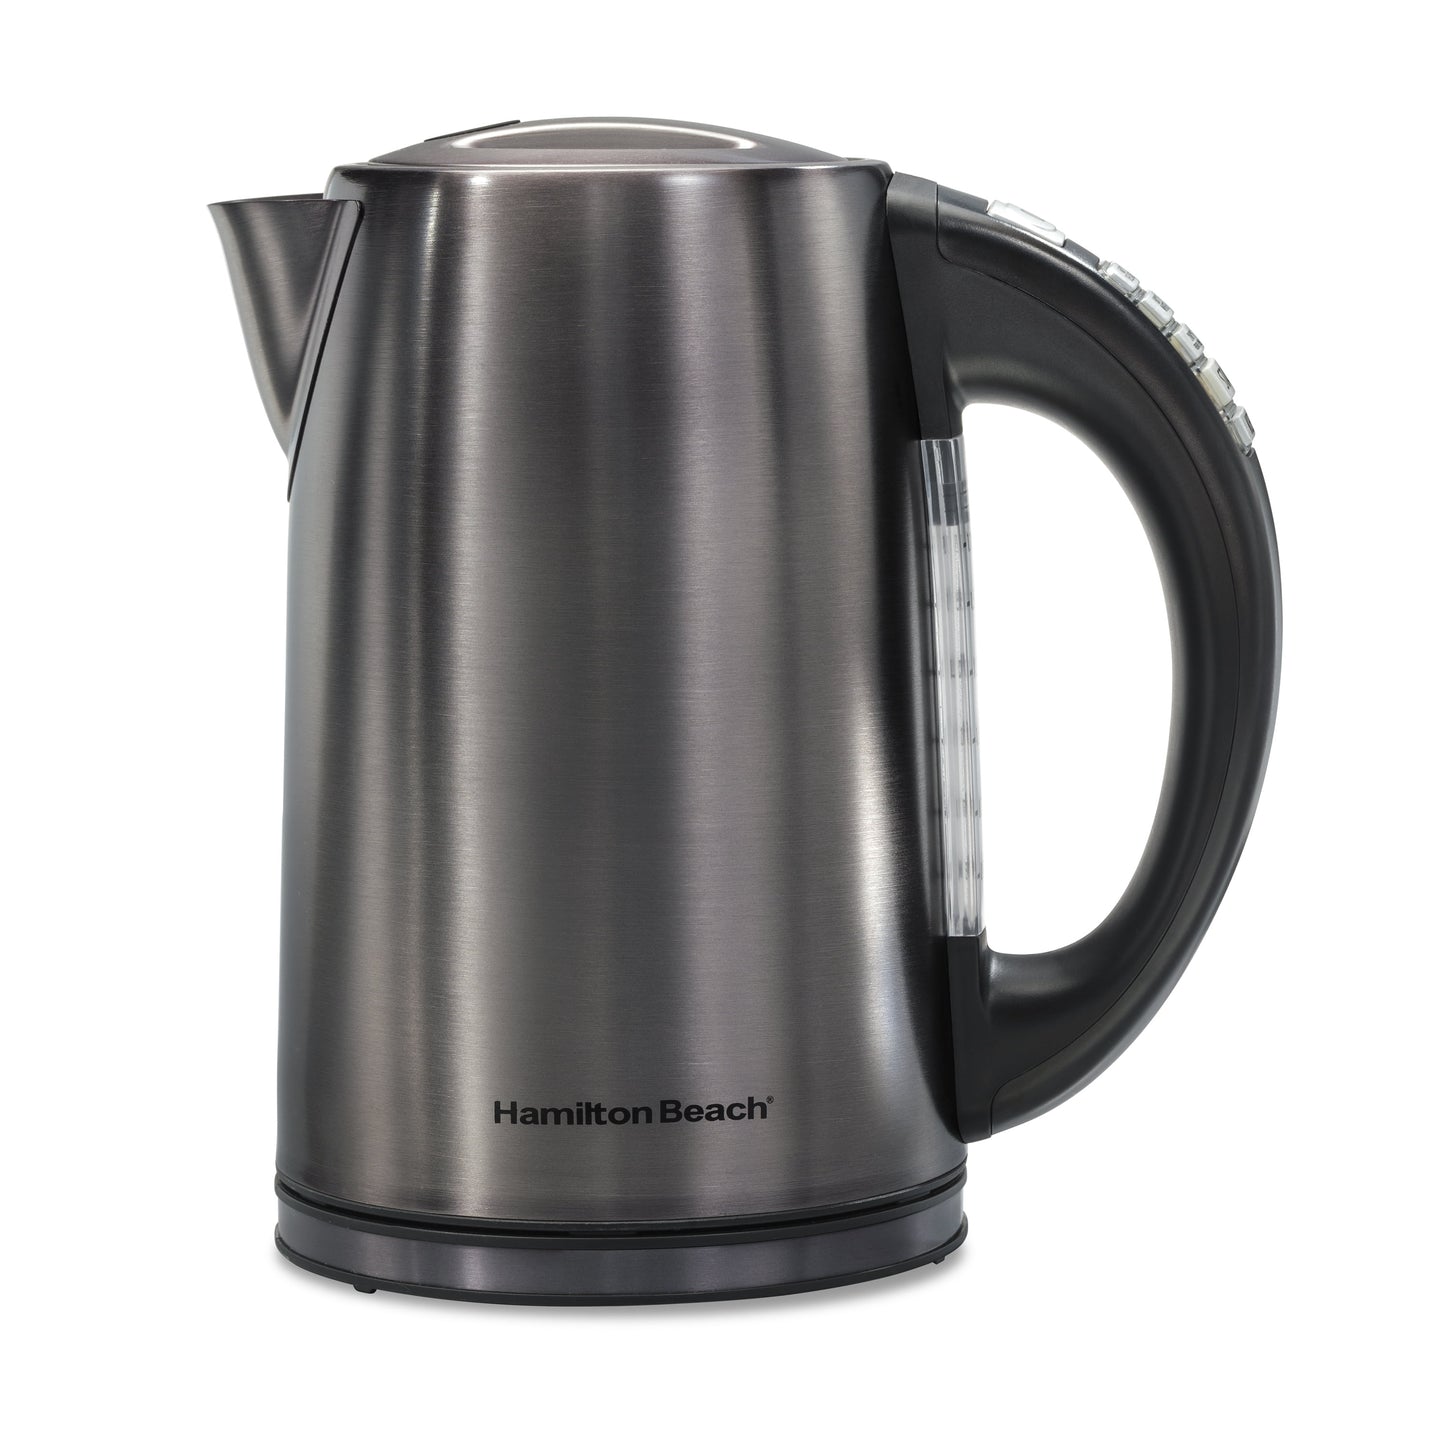 Hamilton Beach Variable Temperature Electric Kettle, 1.7 Liter, Black, Stainless Steel, New, 41022F